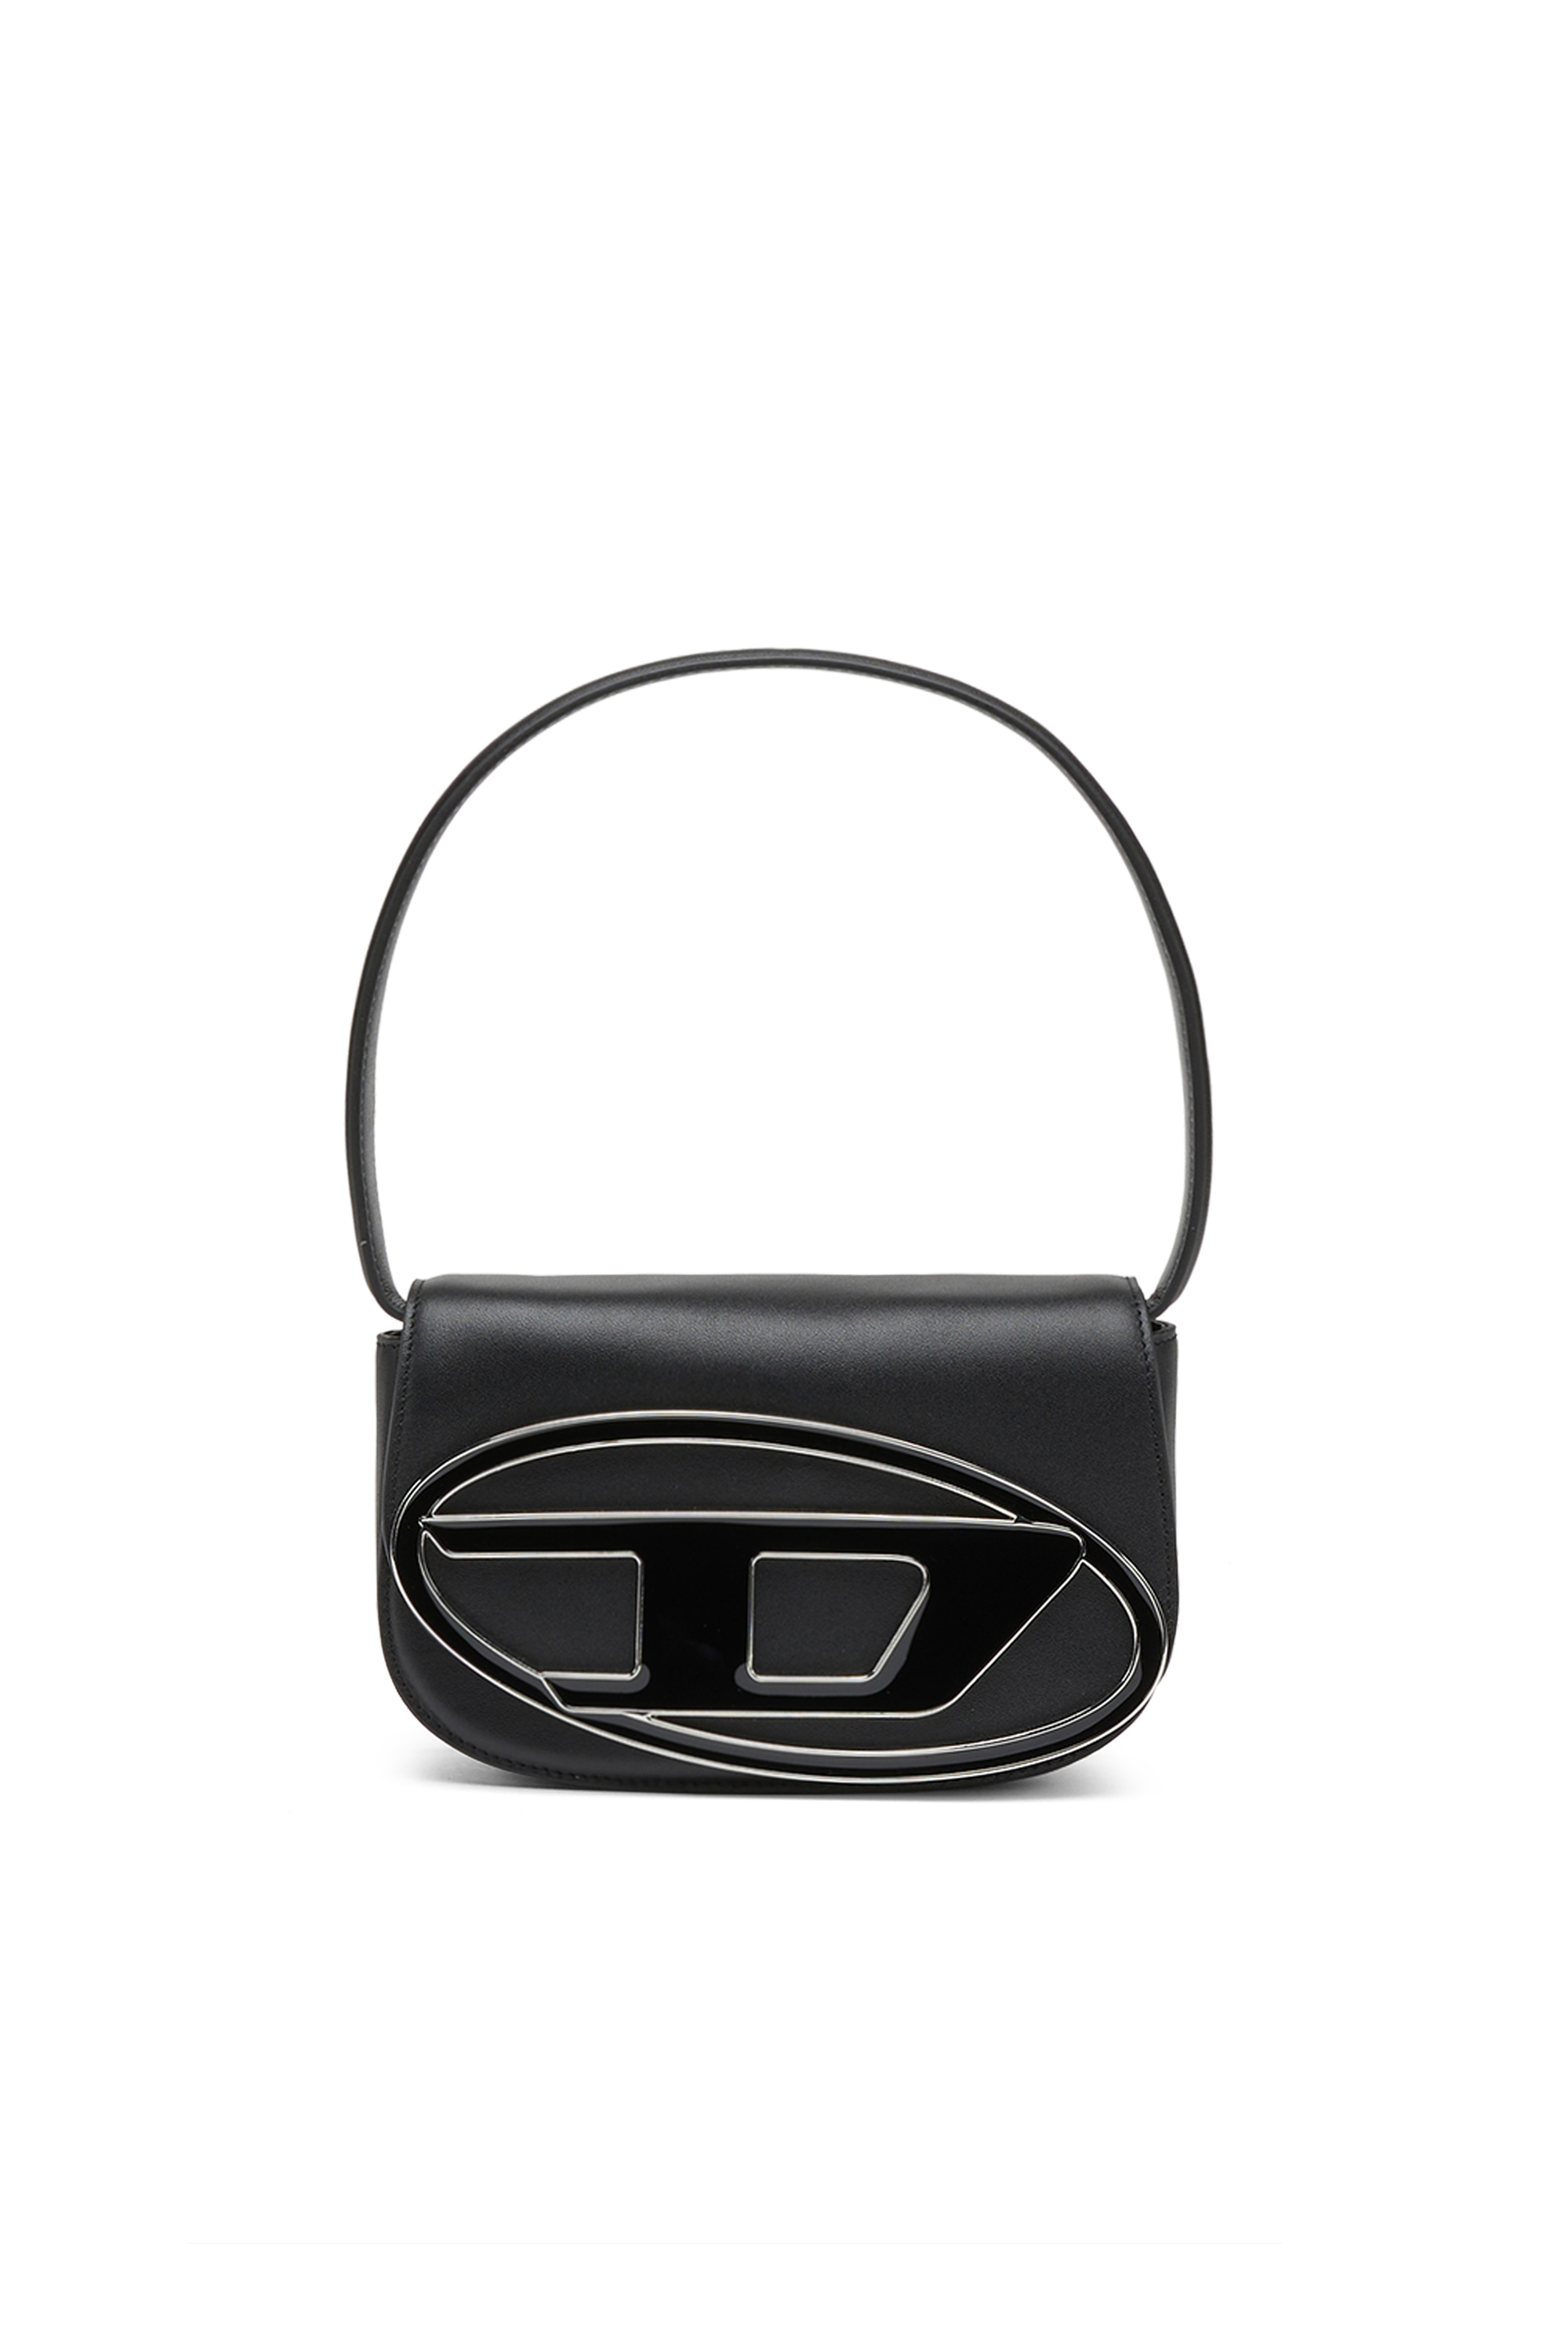 1DR - Iconic shoulder bag in nappa leather